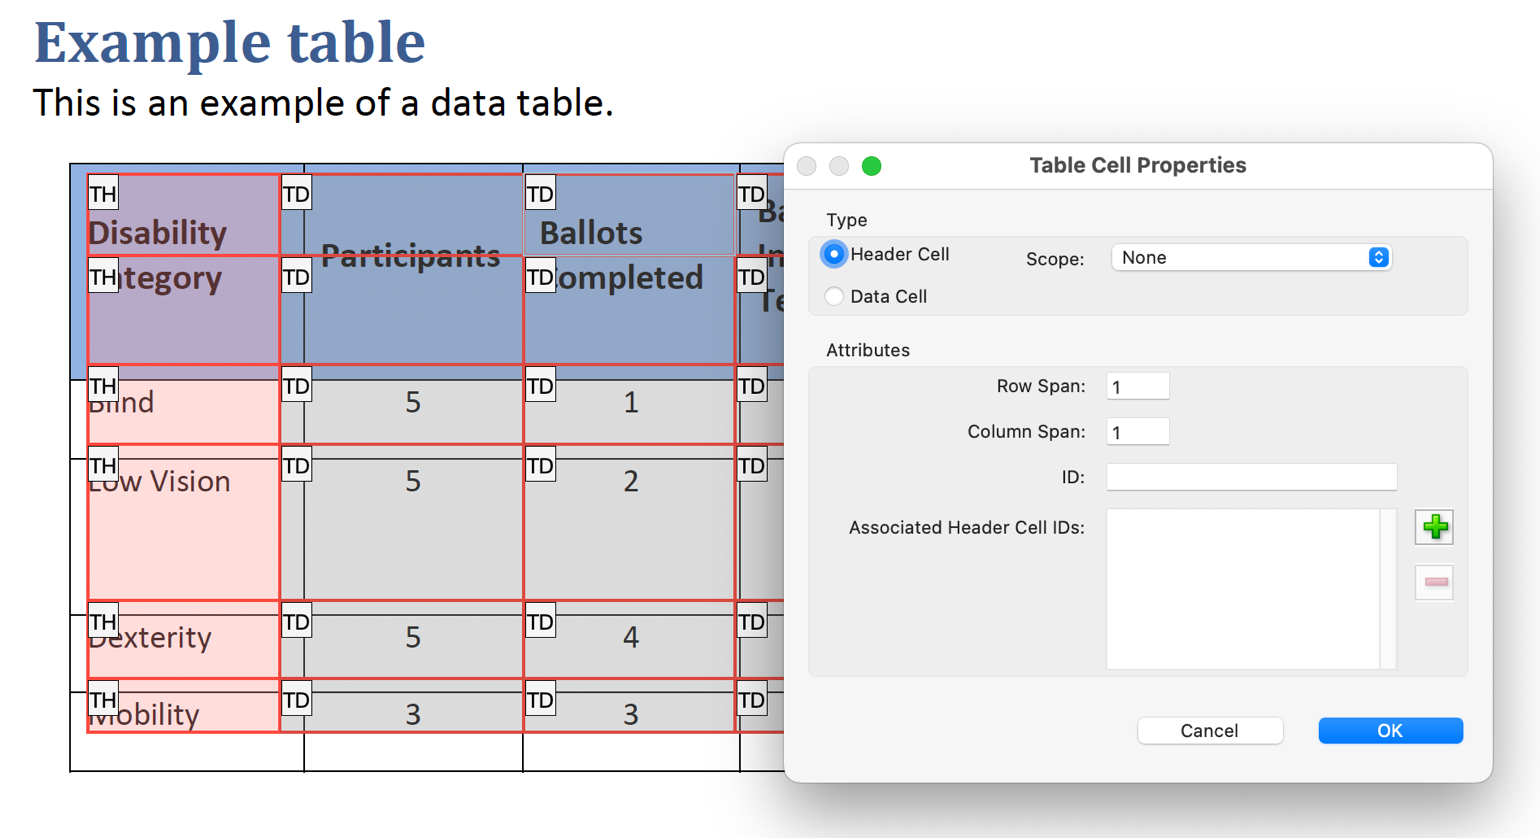 The Table Cells Properties dialog showing the data cell changed to a header cell.